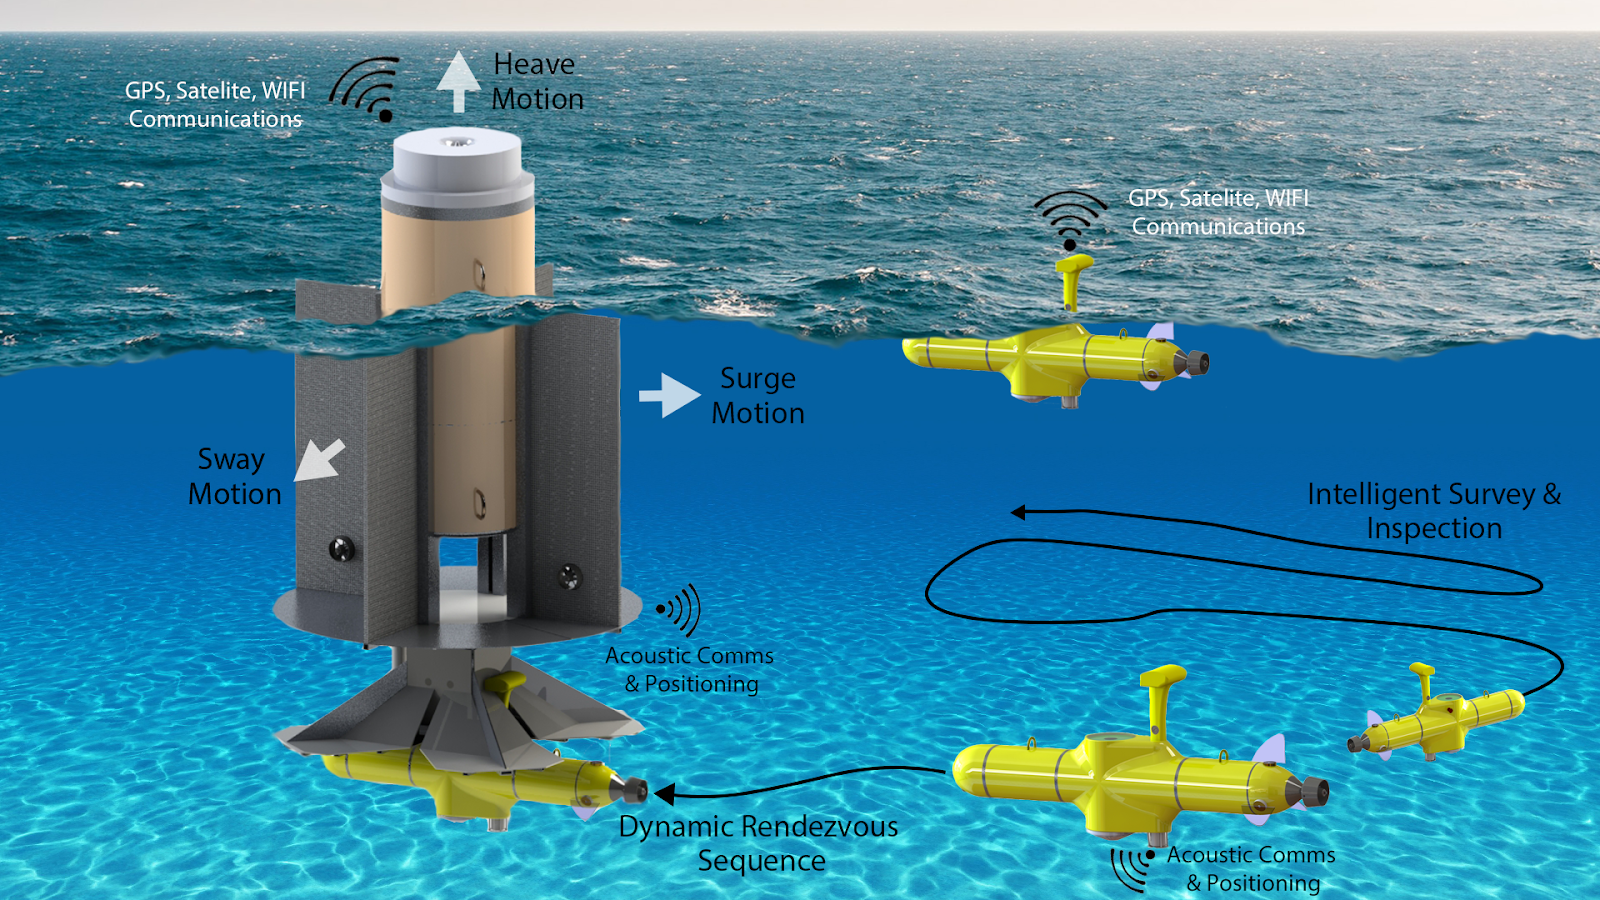 Team Halona's design for a wave-powered autonomous underwater vehicle charging station.